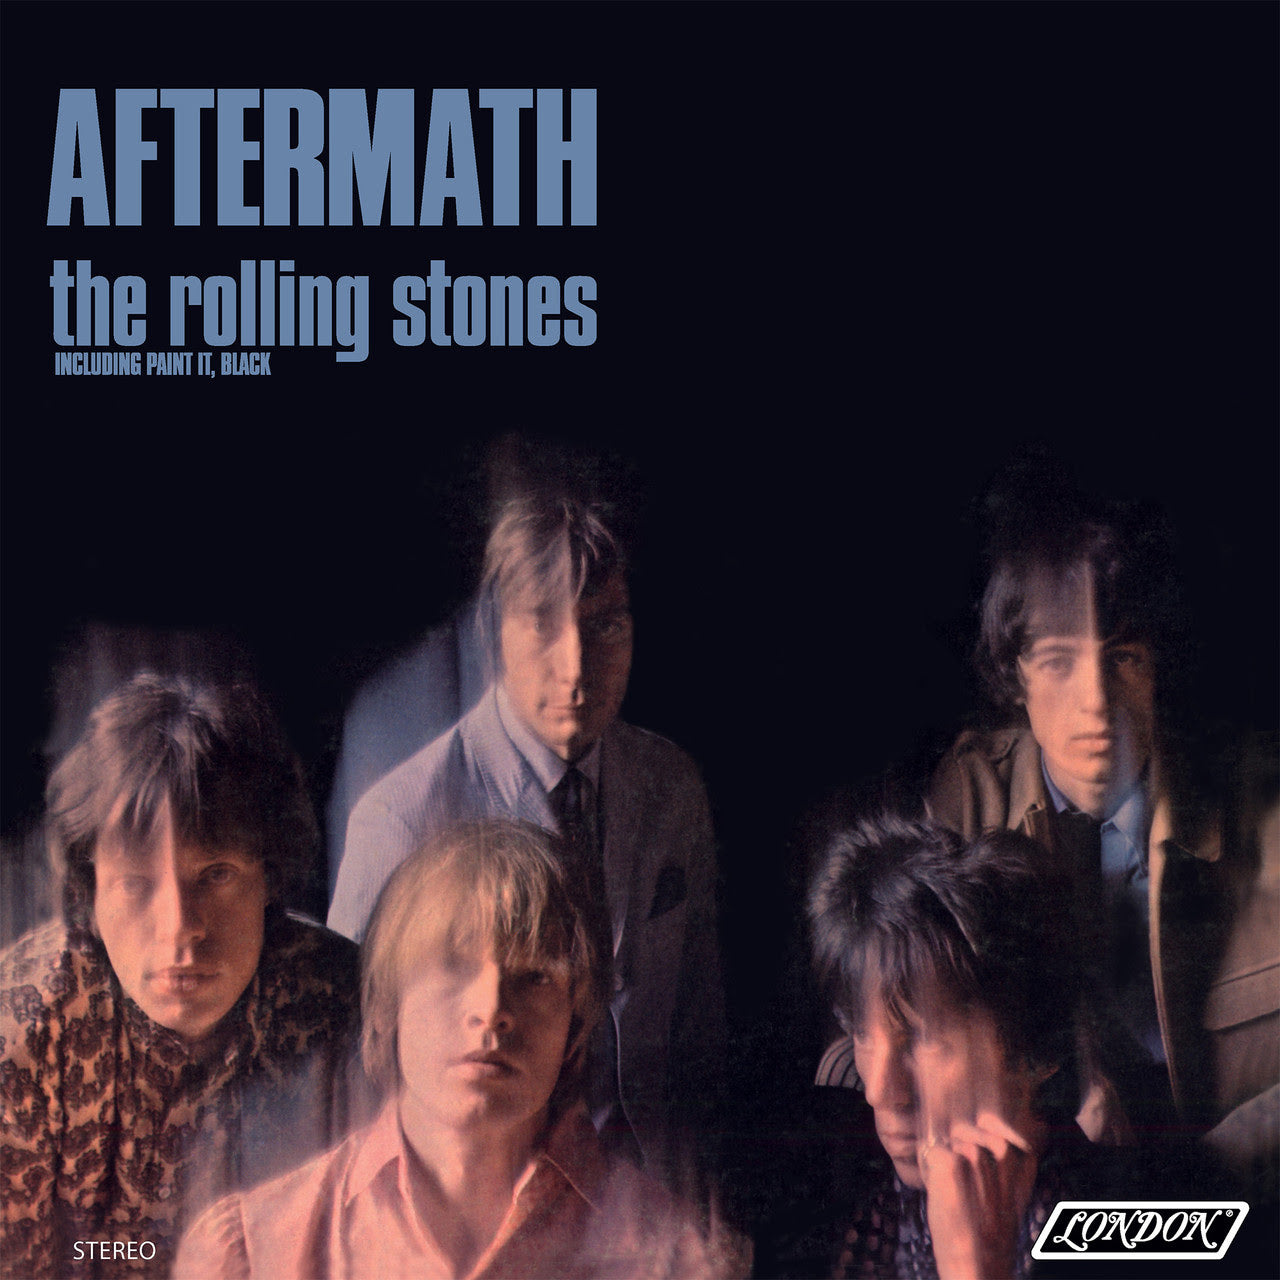 The Rolling Stones – Aftermath (US Version) | Buy the Vinyl LP from Flying Nun Records